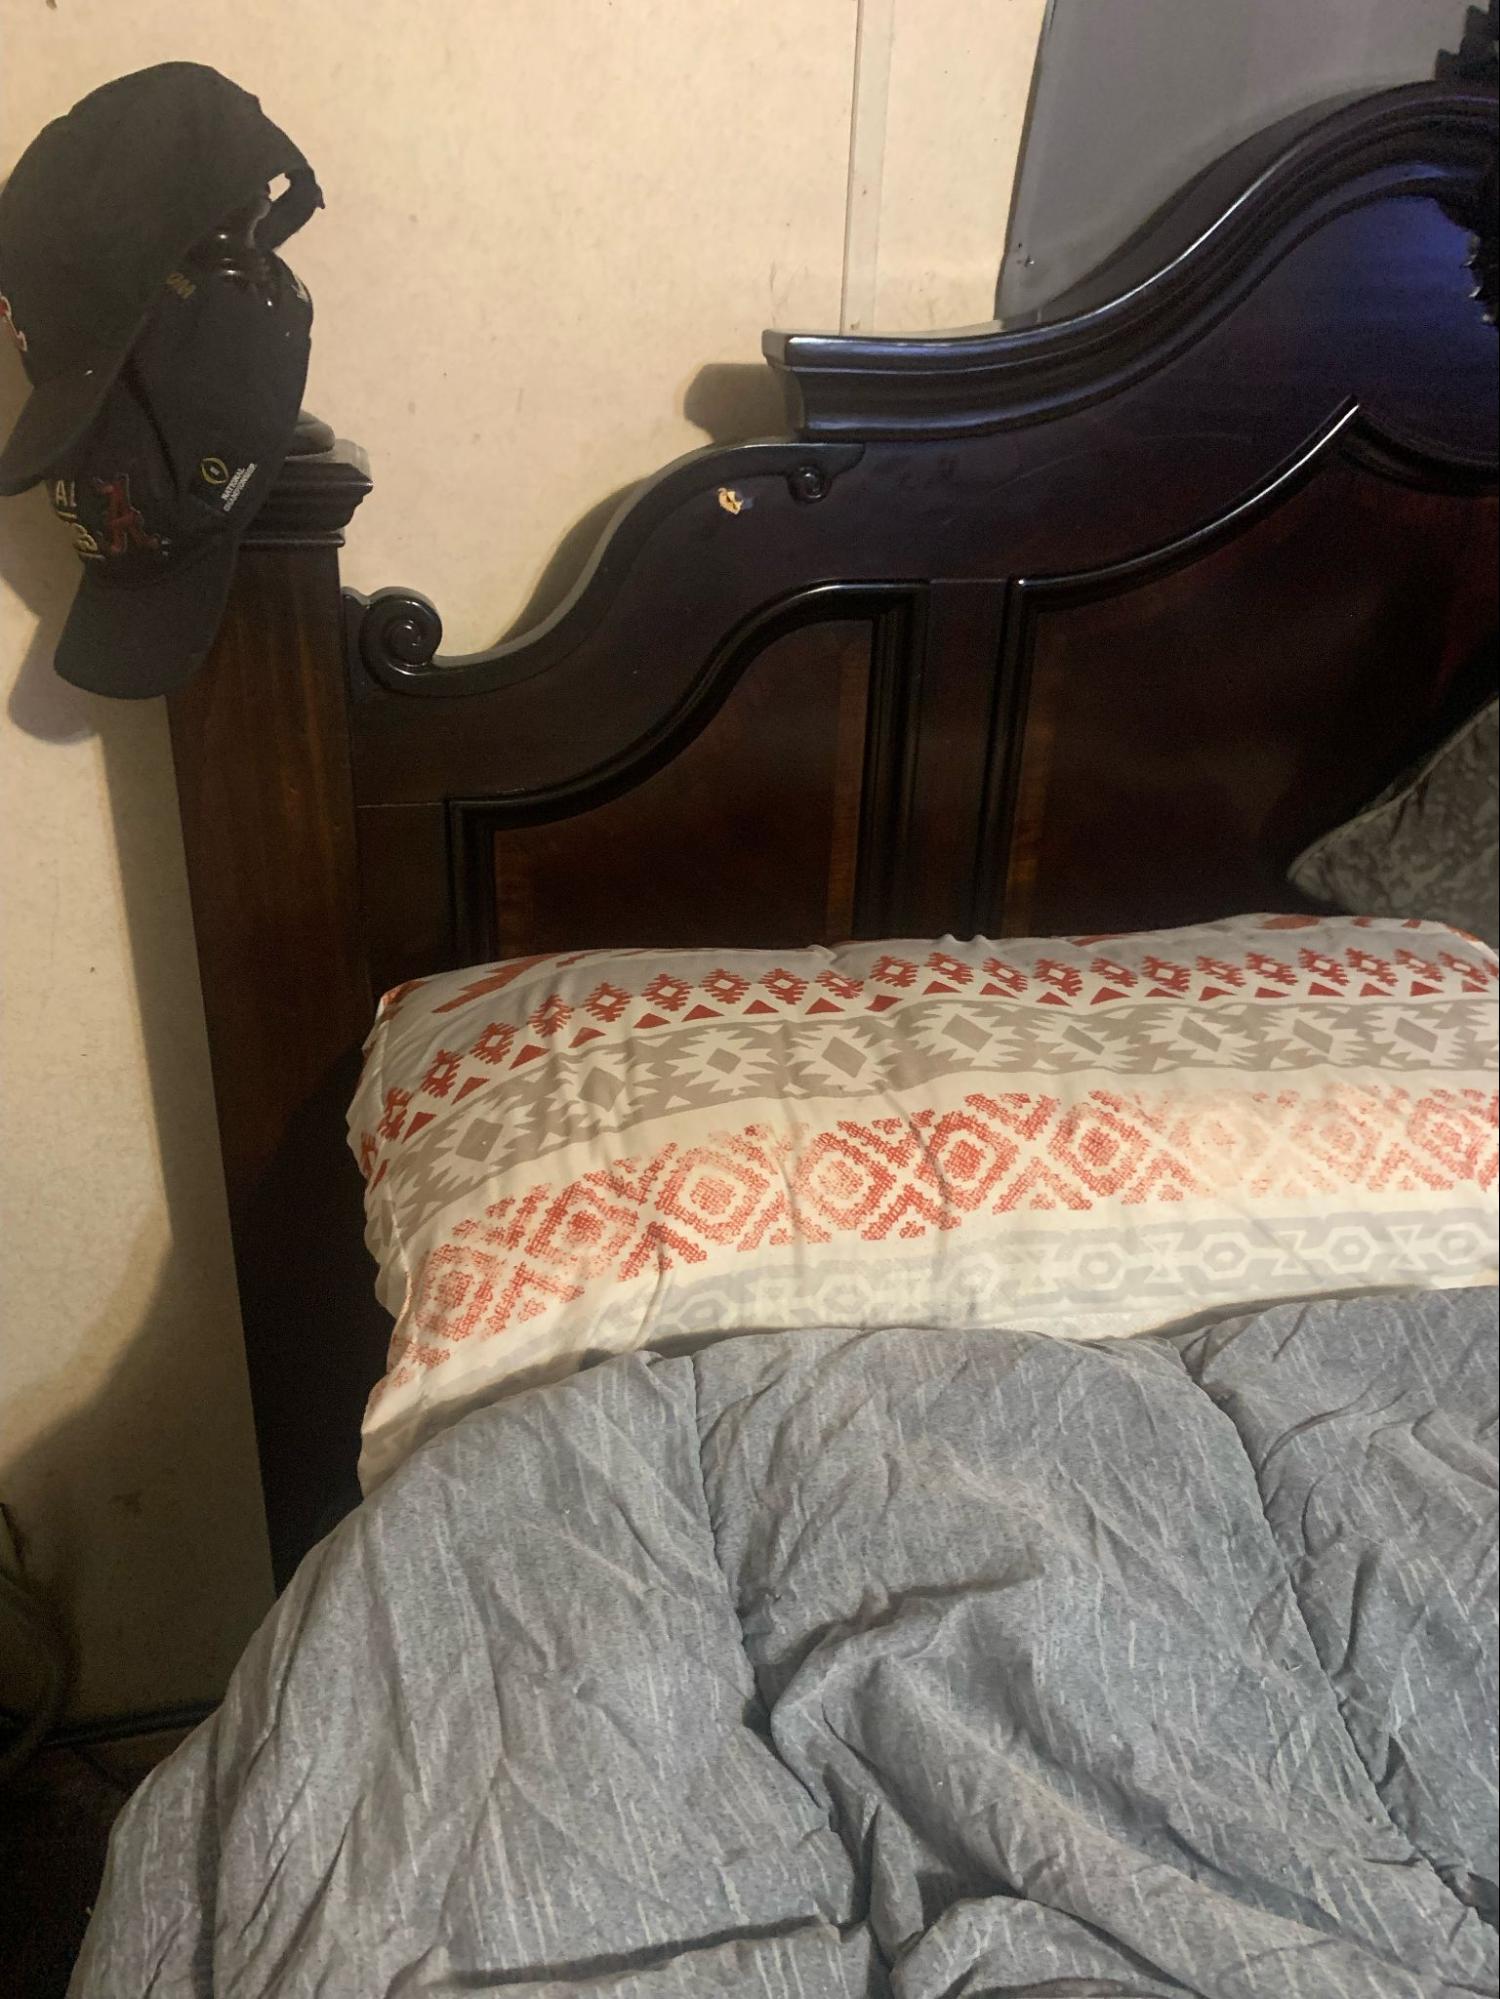 A bullet struck inches above a child’s pillow while asleep. 